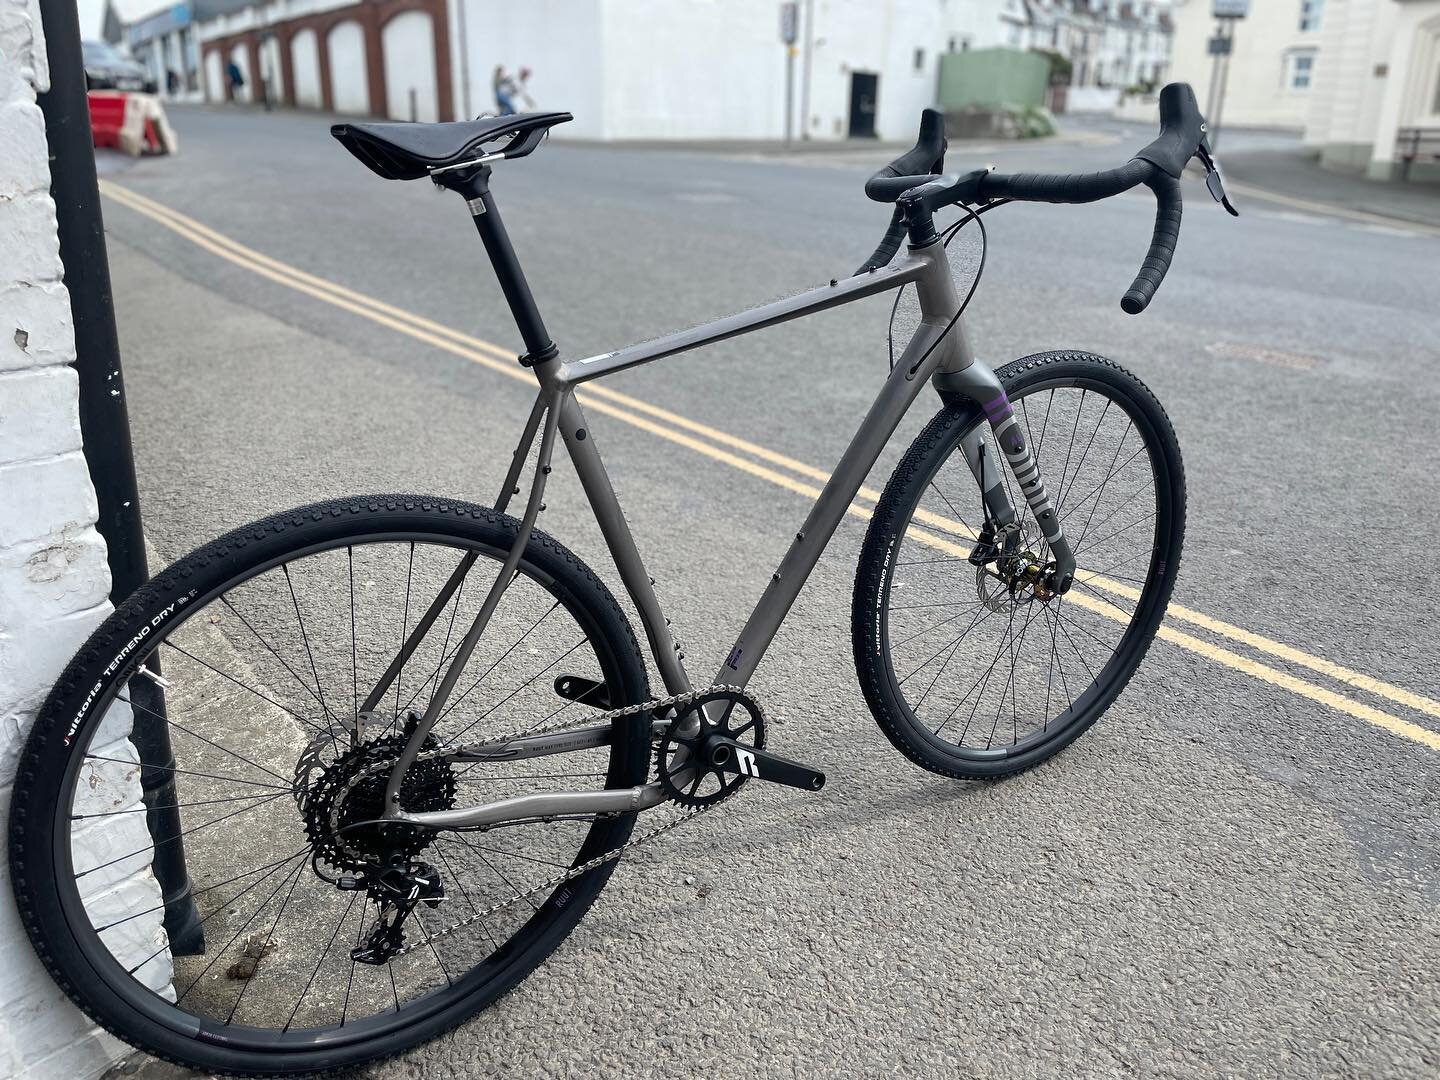 The Rondo Ruut Al 1 - now in stock. Award winning gravel bike which is the perfect combo for road and off road. 
My personal favourite bike I have 😉
Available in:
- medium 
- large
- x large

#rondoruut #rondobikes #rondocc #gravelbike #dropbarsoffr